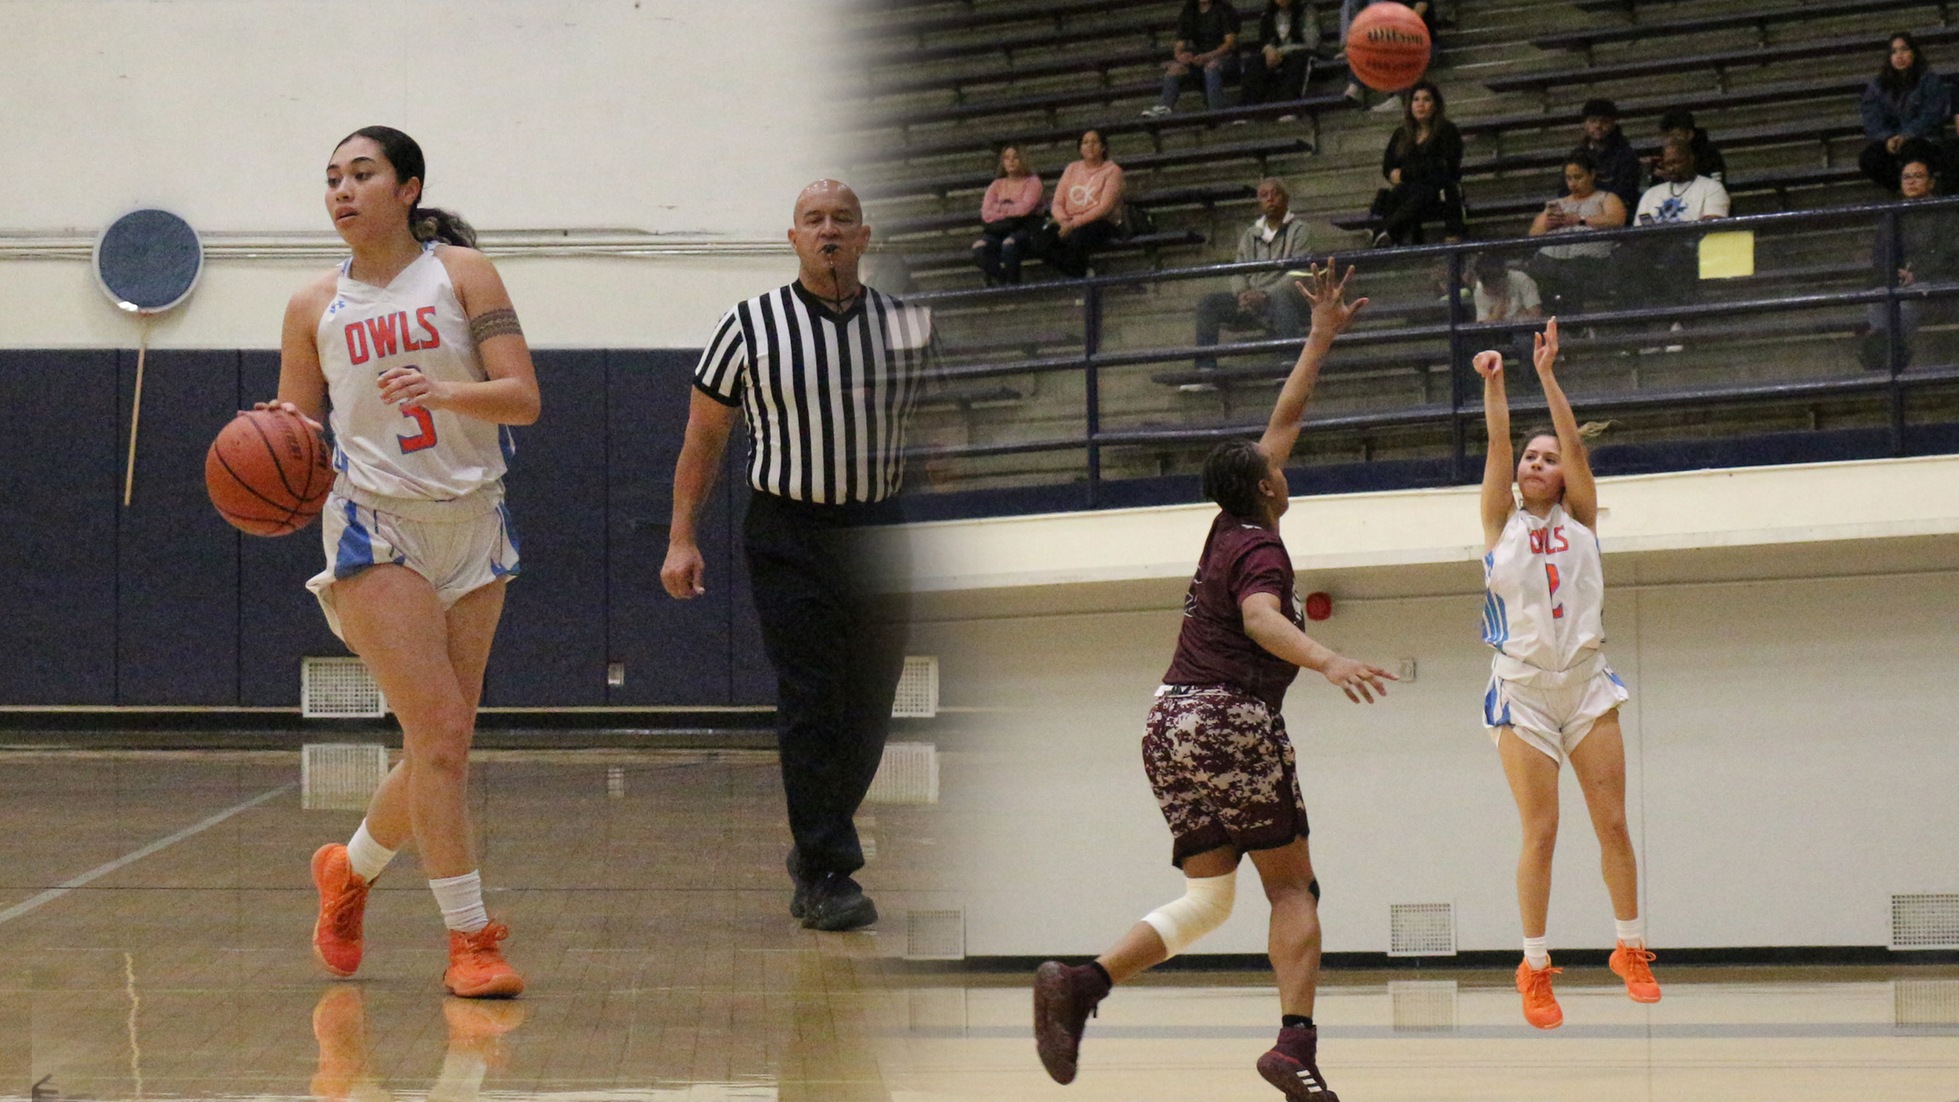 Malia (Rocha) Ili and Jailene Rosas were both named to the 2019-20 All-Western State Conference South Division team. Photos by: Brianna Jara